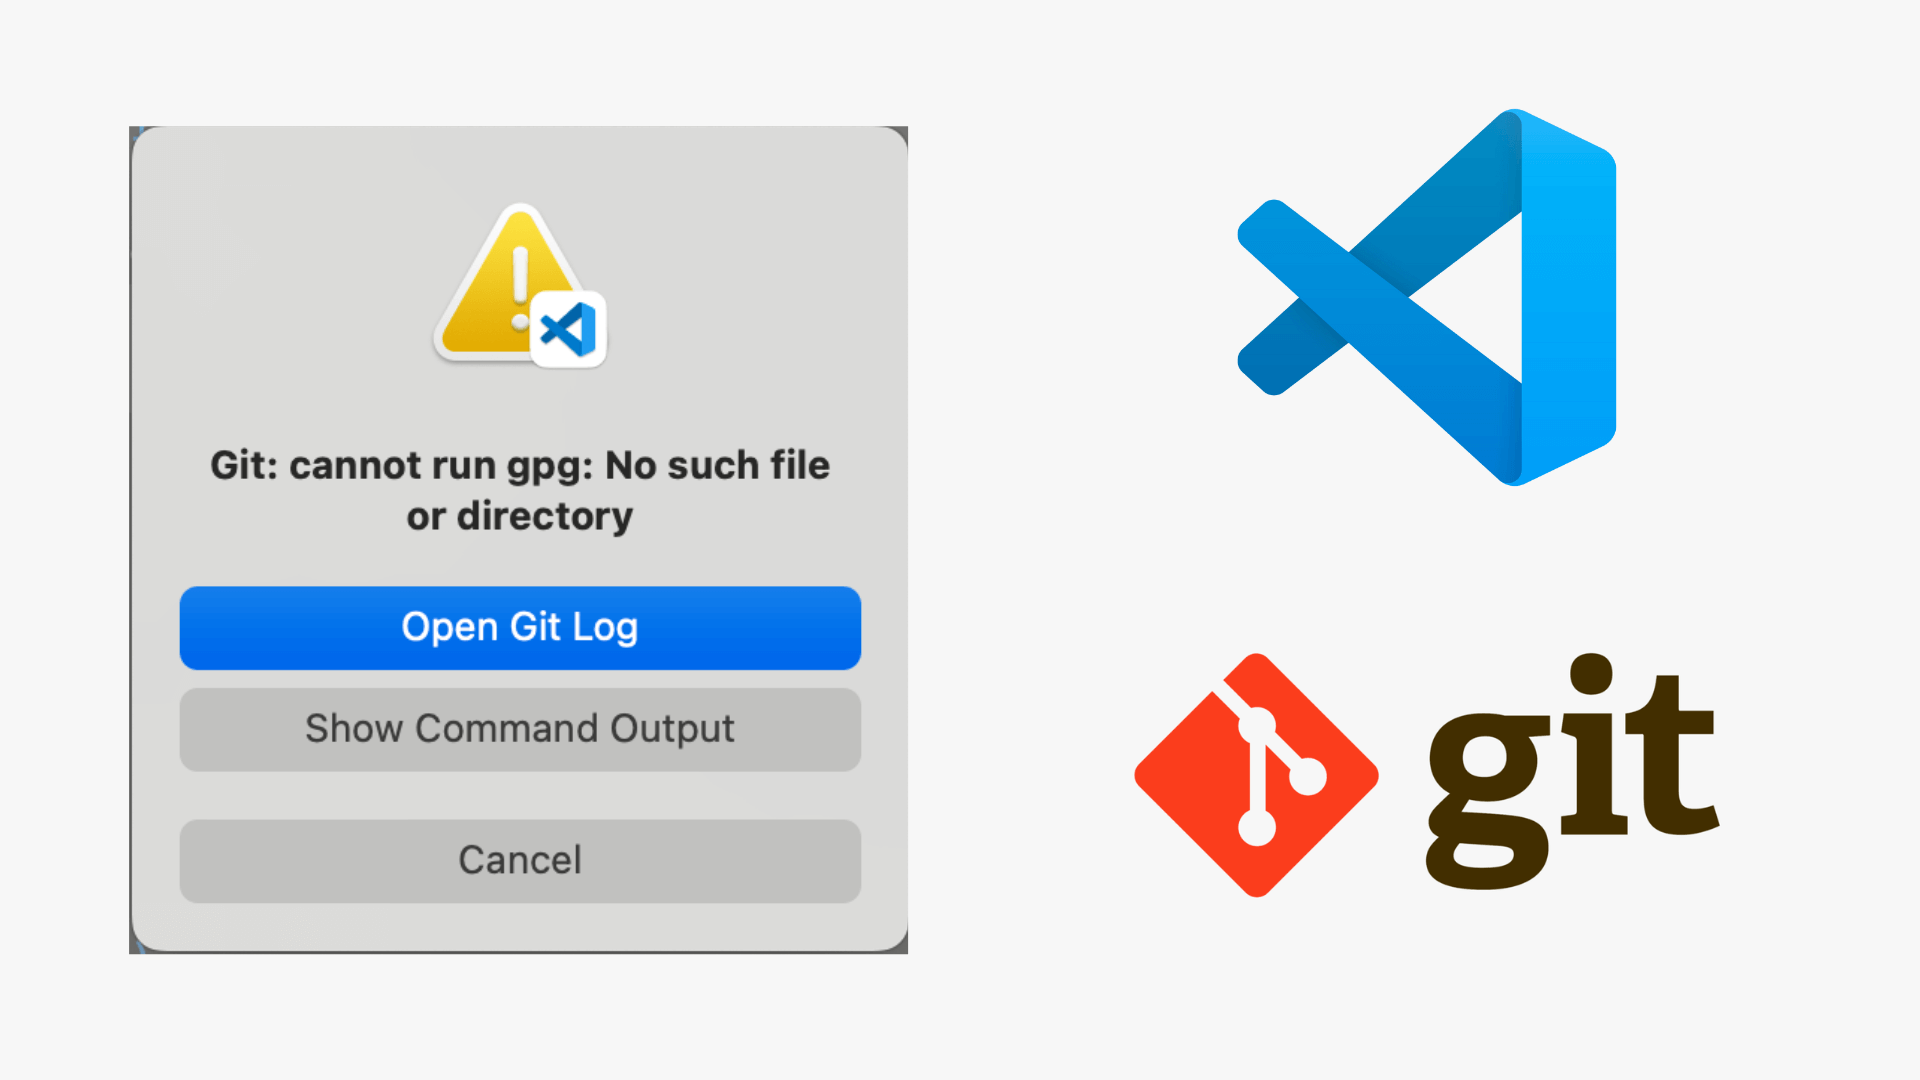 No such file or Directory. No such directory app